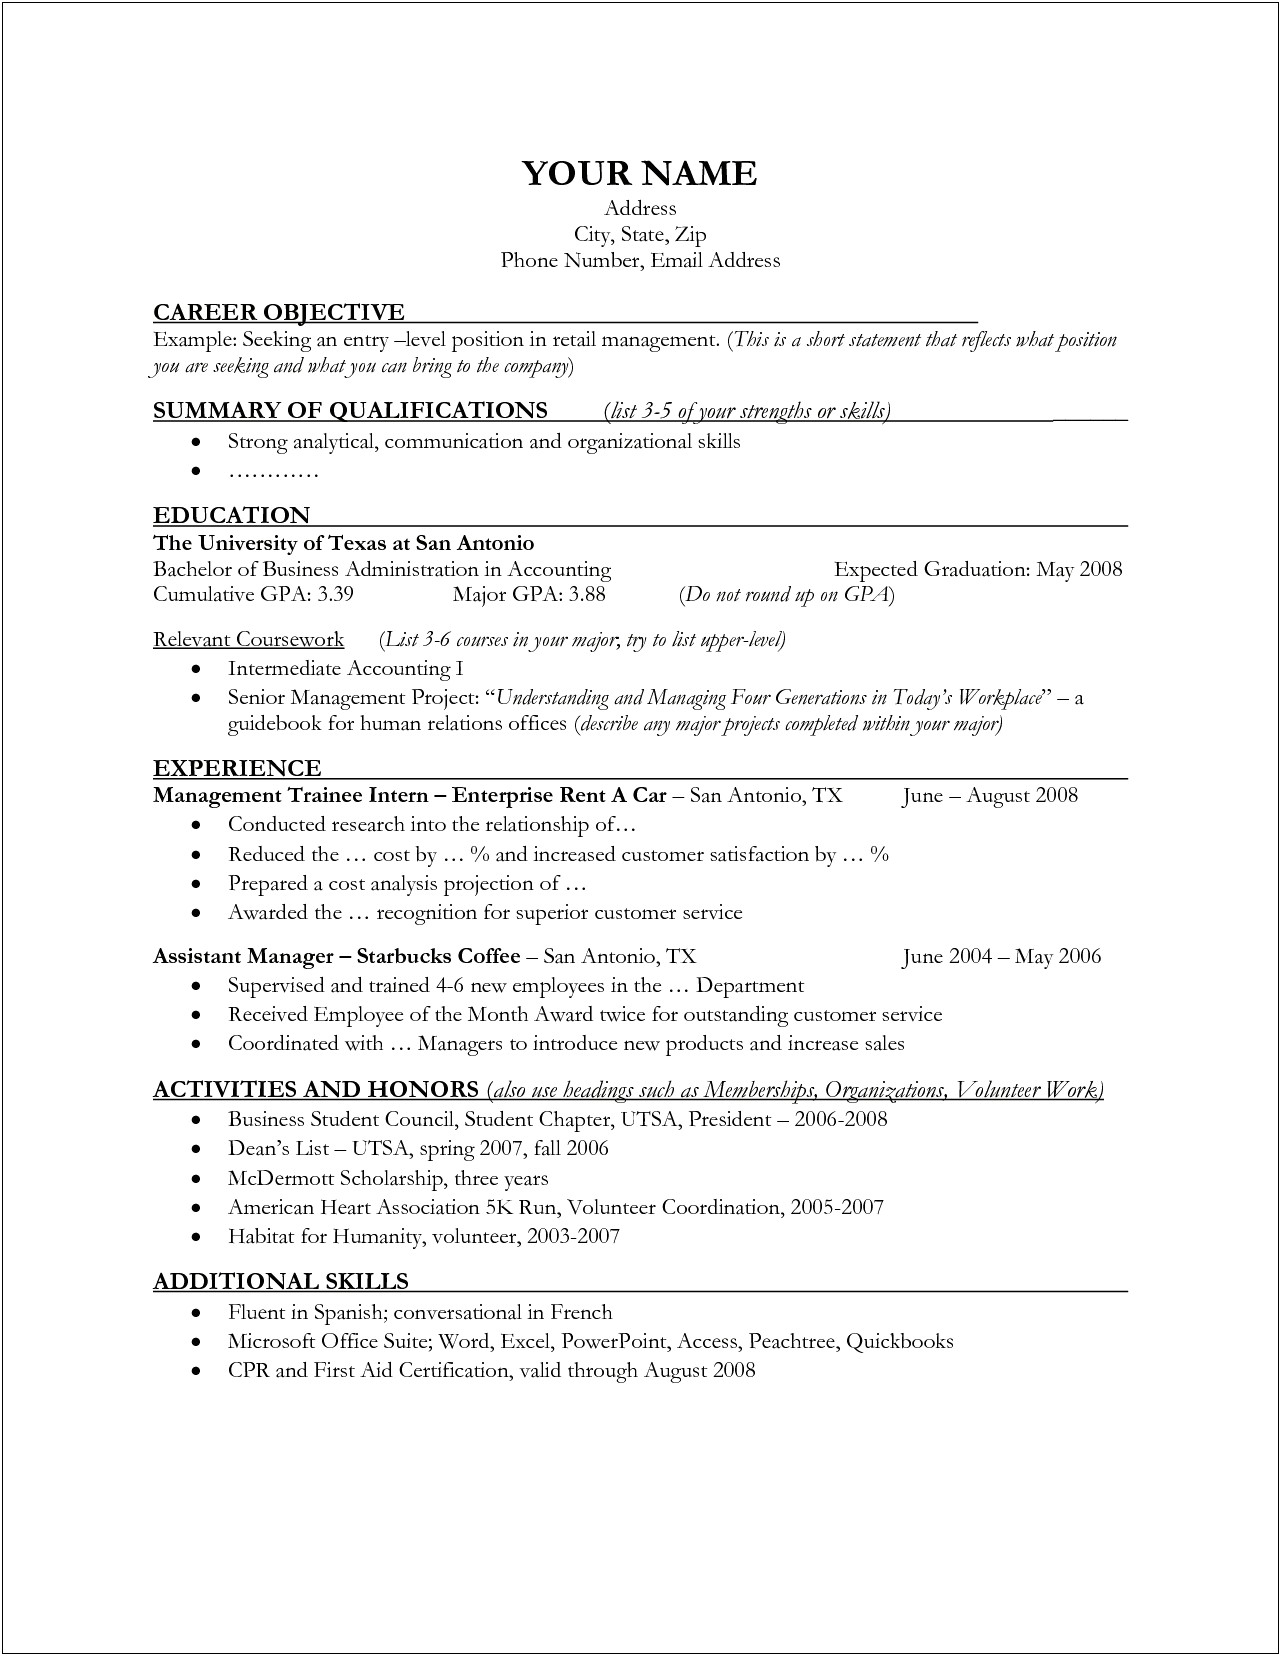 Assistant Office Manager Resume Objective Examples